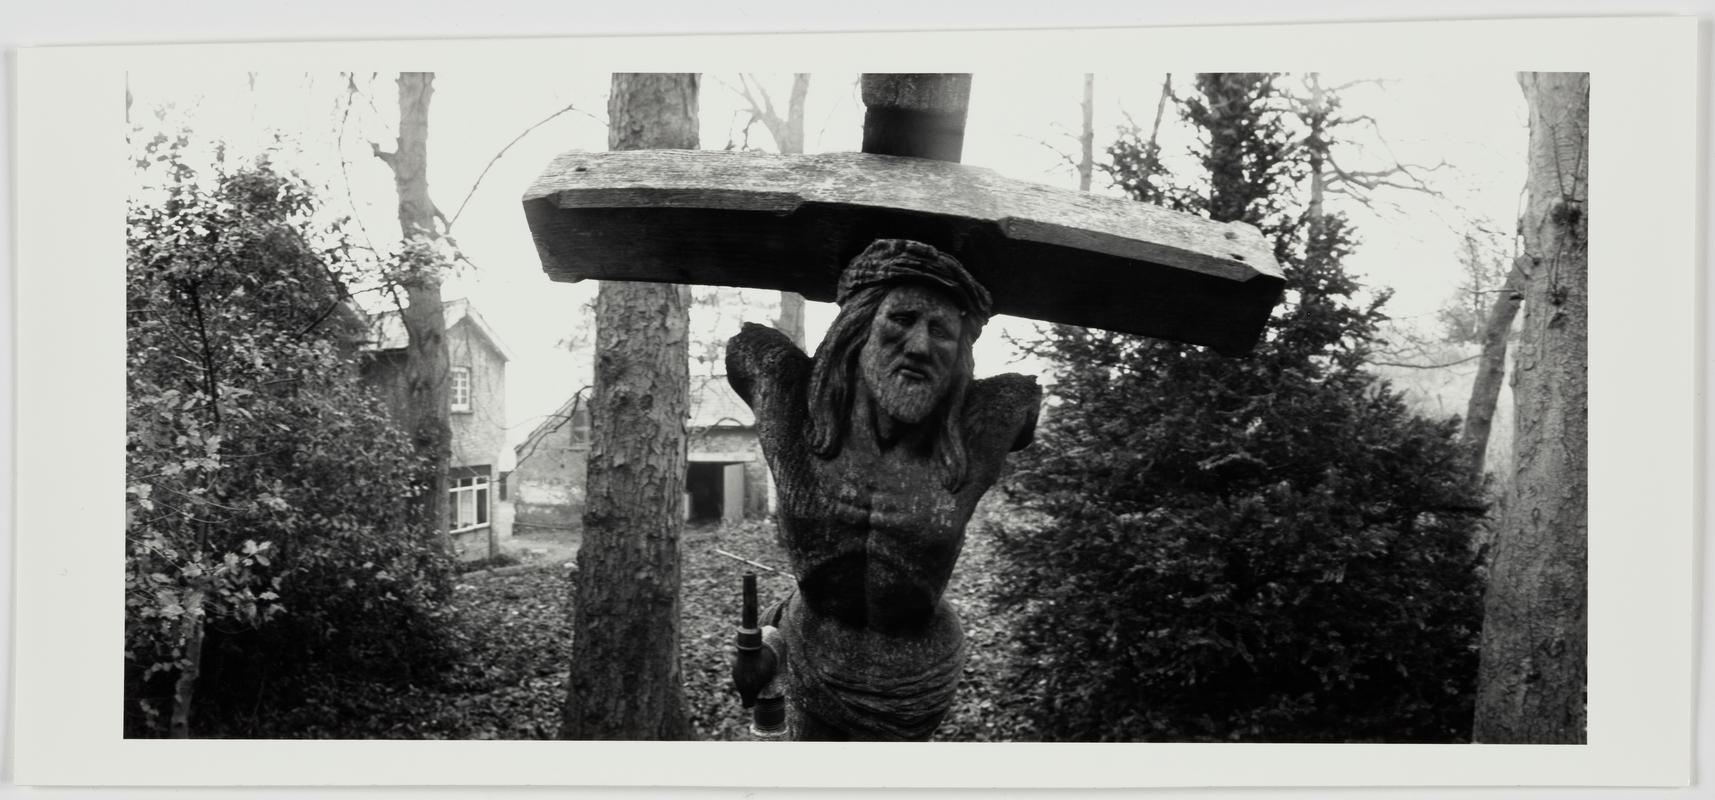 Christ Without Arms, Tap Without Handle. YHA grounds, Brecon. 1977